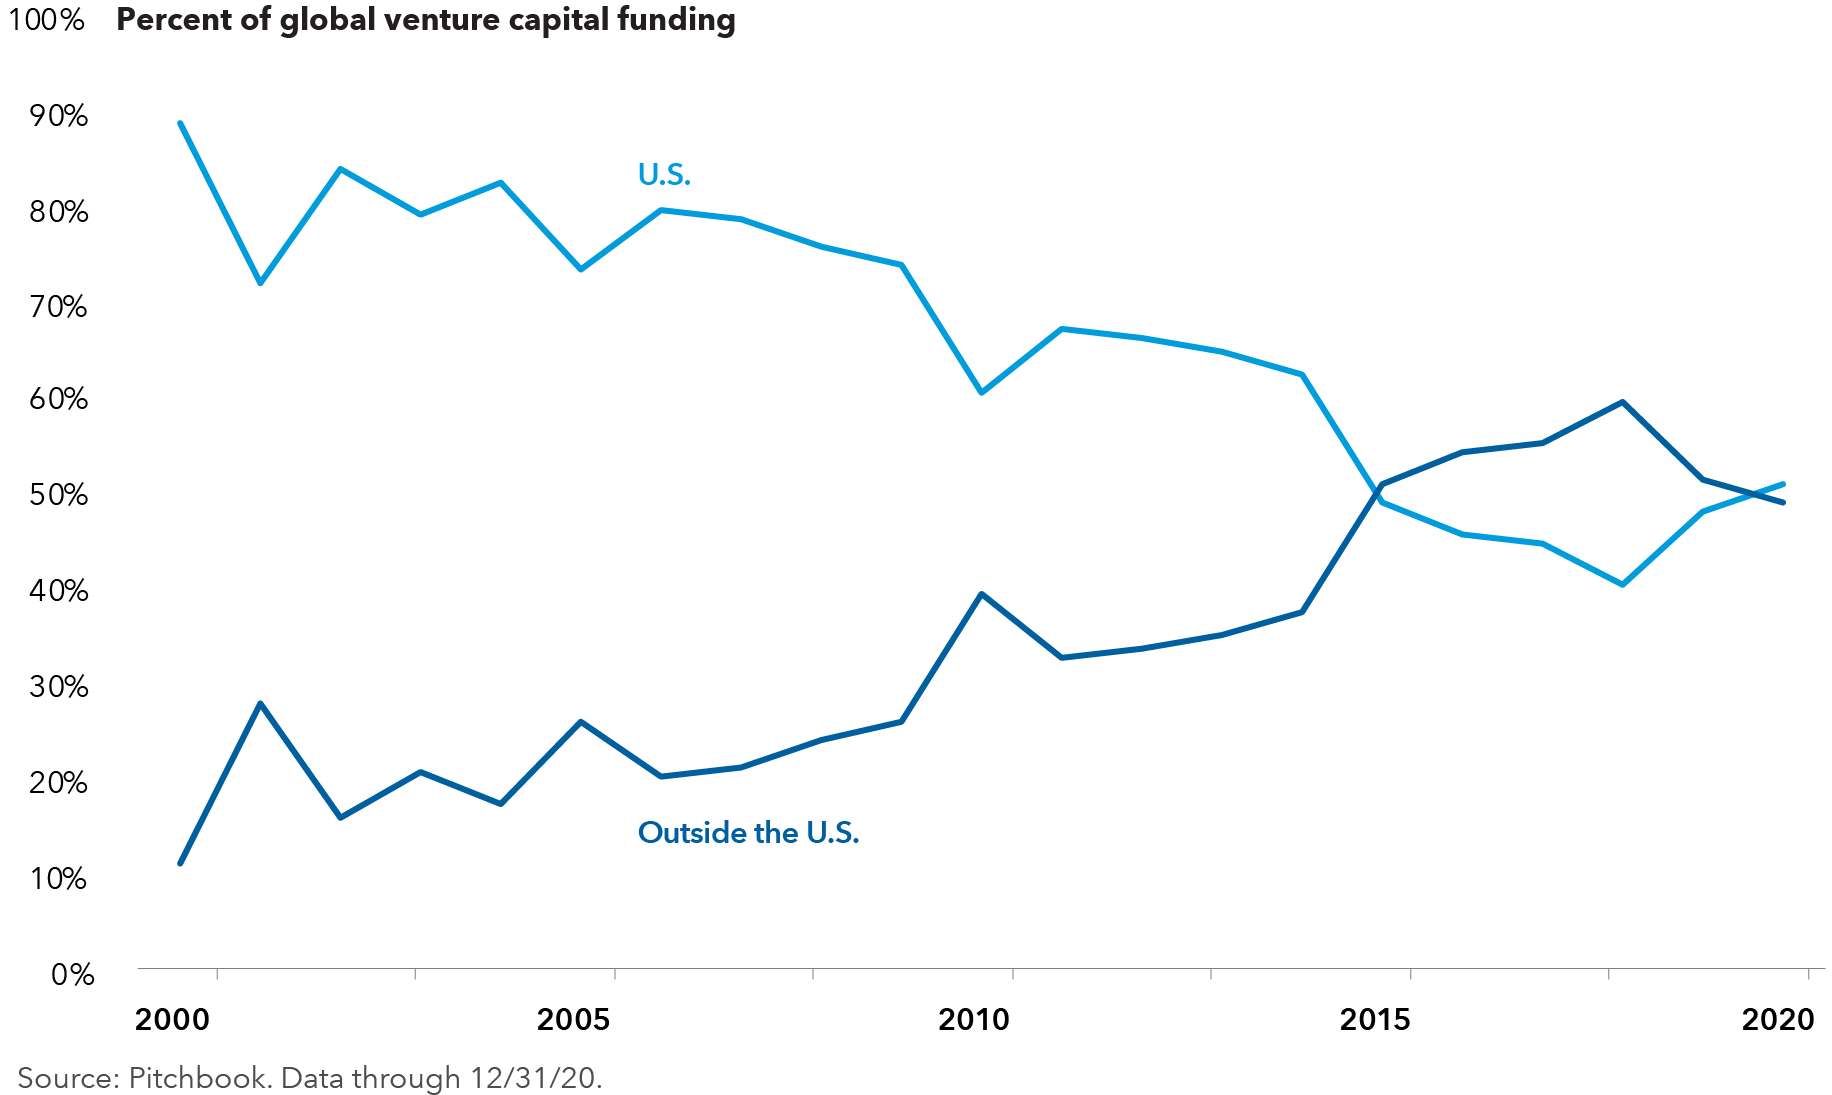 Chart shows the percentage of global venture capital funding from 2000 to 2020, with the “U.S.” category generally on the decline and the “Outside the U.S.” category generally on the rise until they become relatively equal. Data through December 31, 2020. Source is Pitchbook.